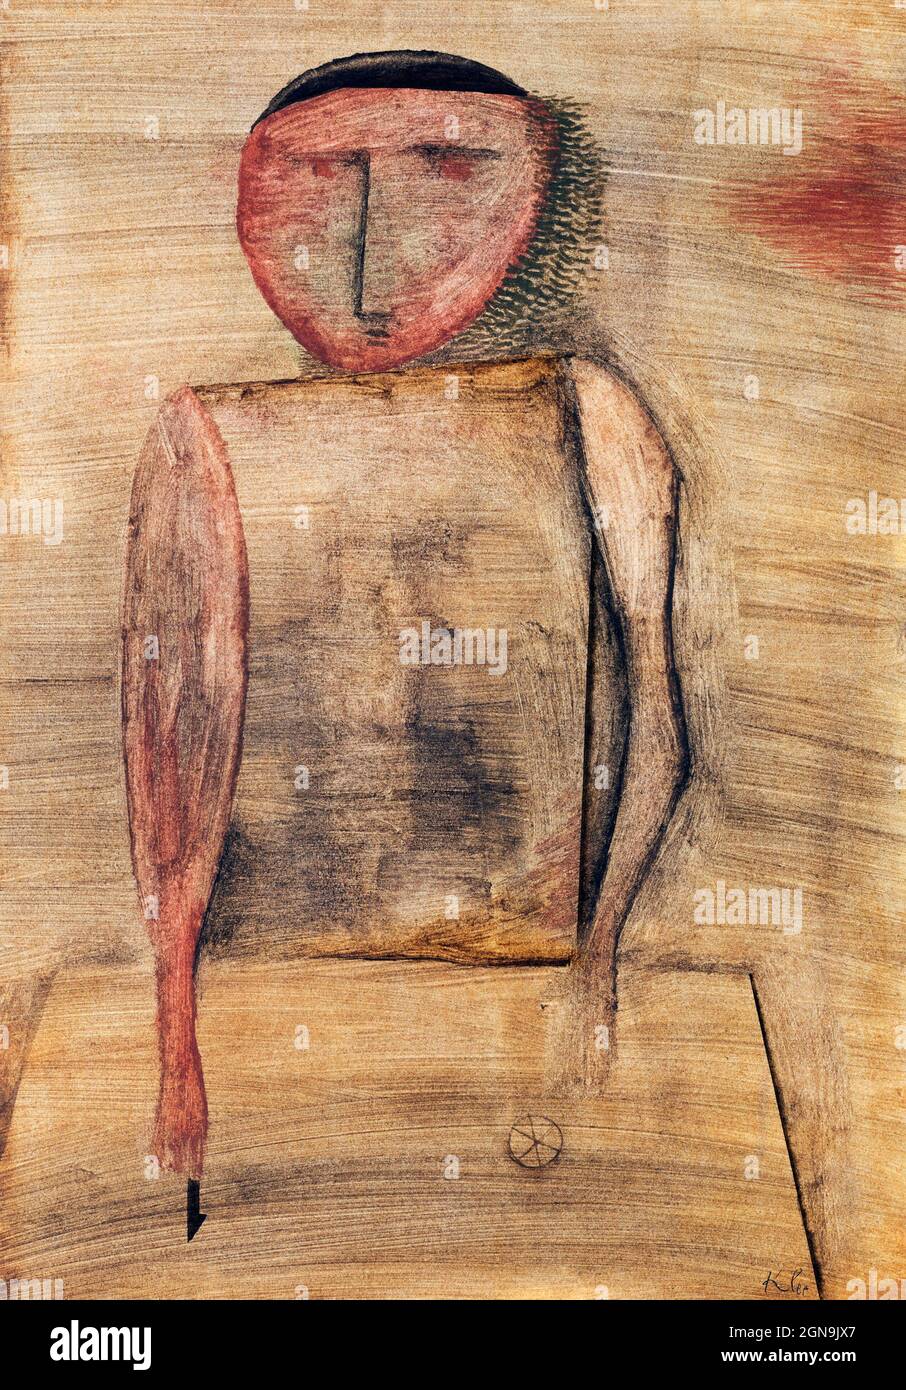 Doctor (1930) by Paul Klee. Stock Photo